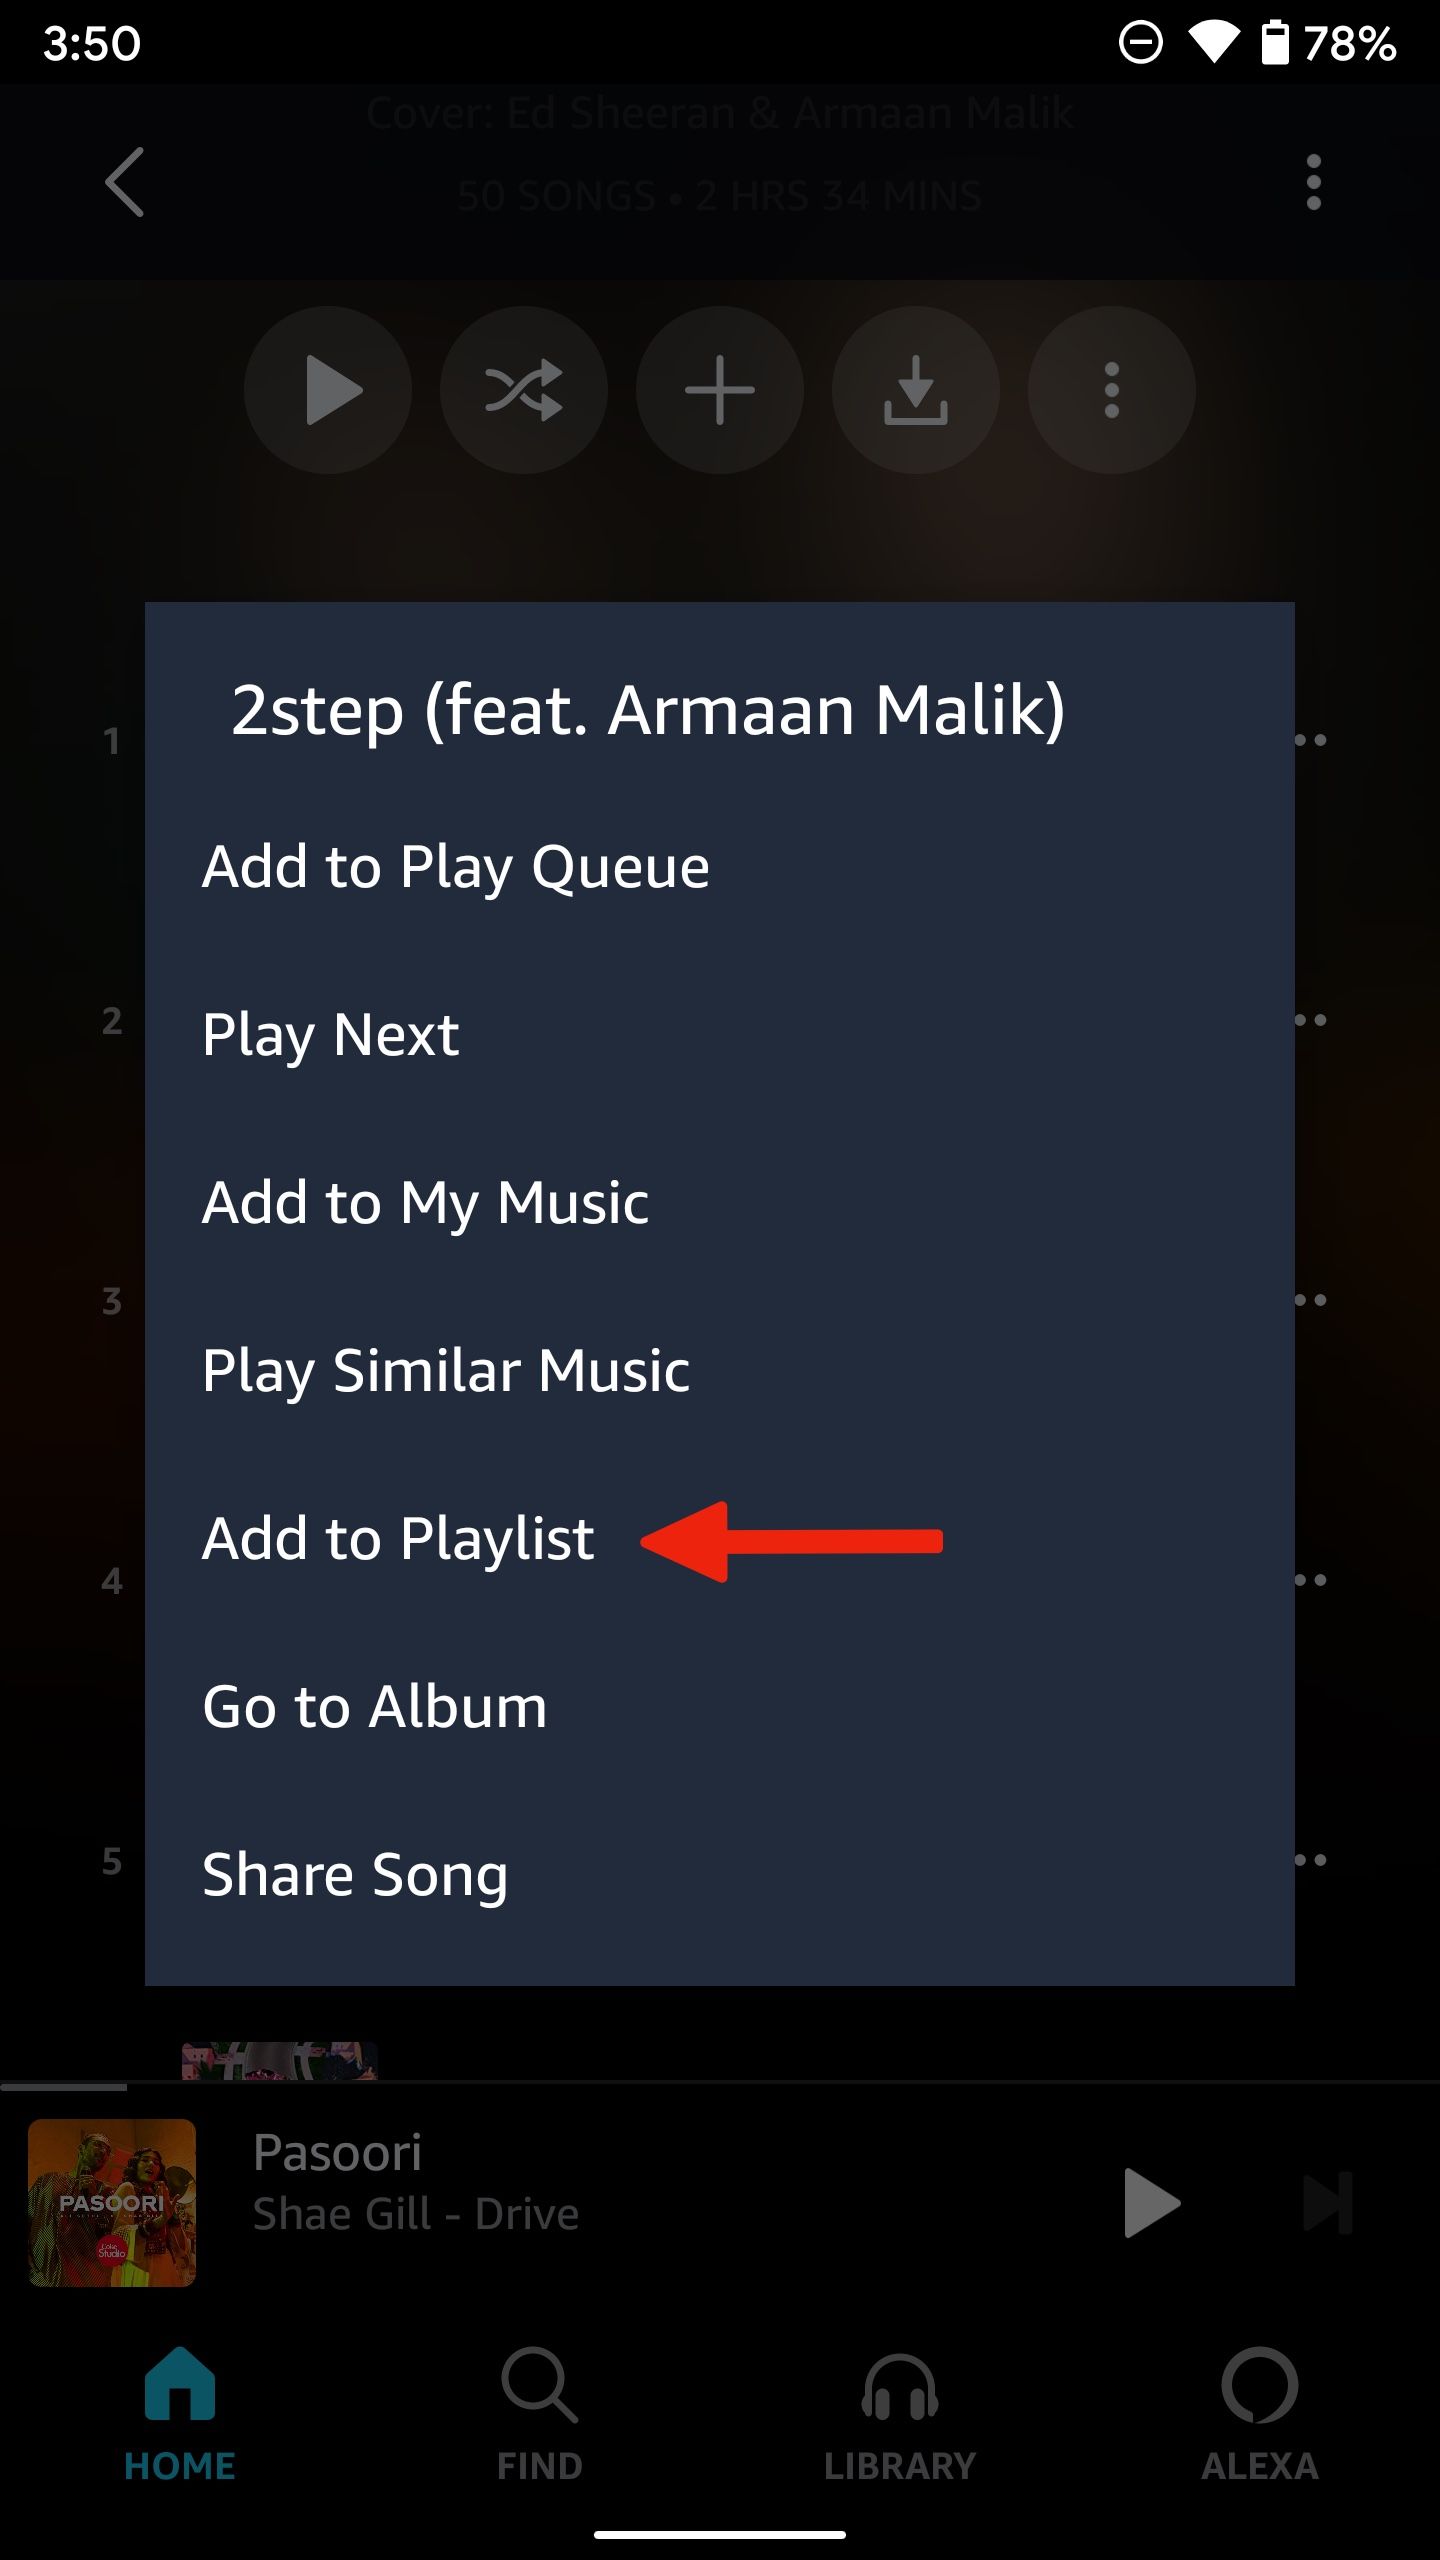 An options popup appears for a specific song in the Amazon Music app, with an arrow pointing to 